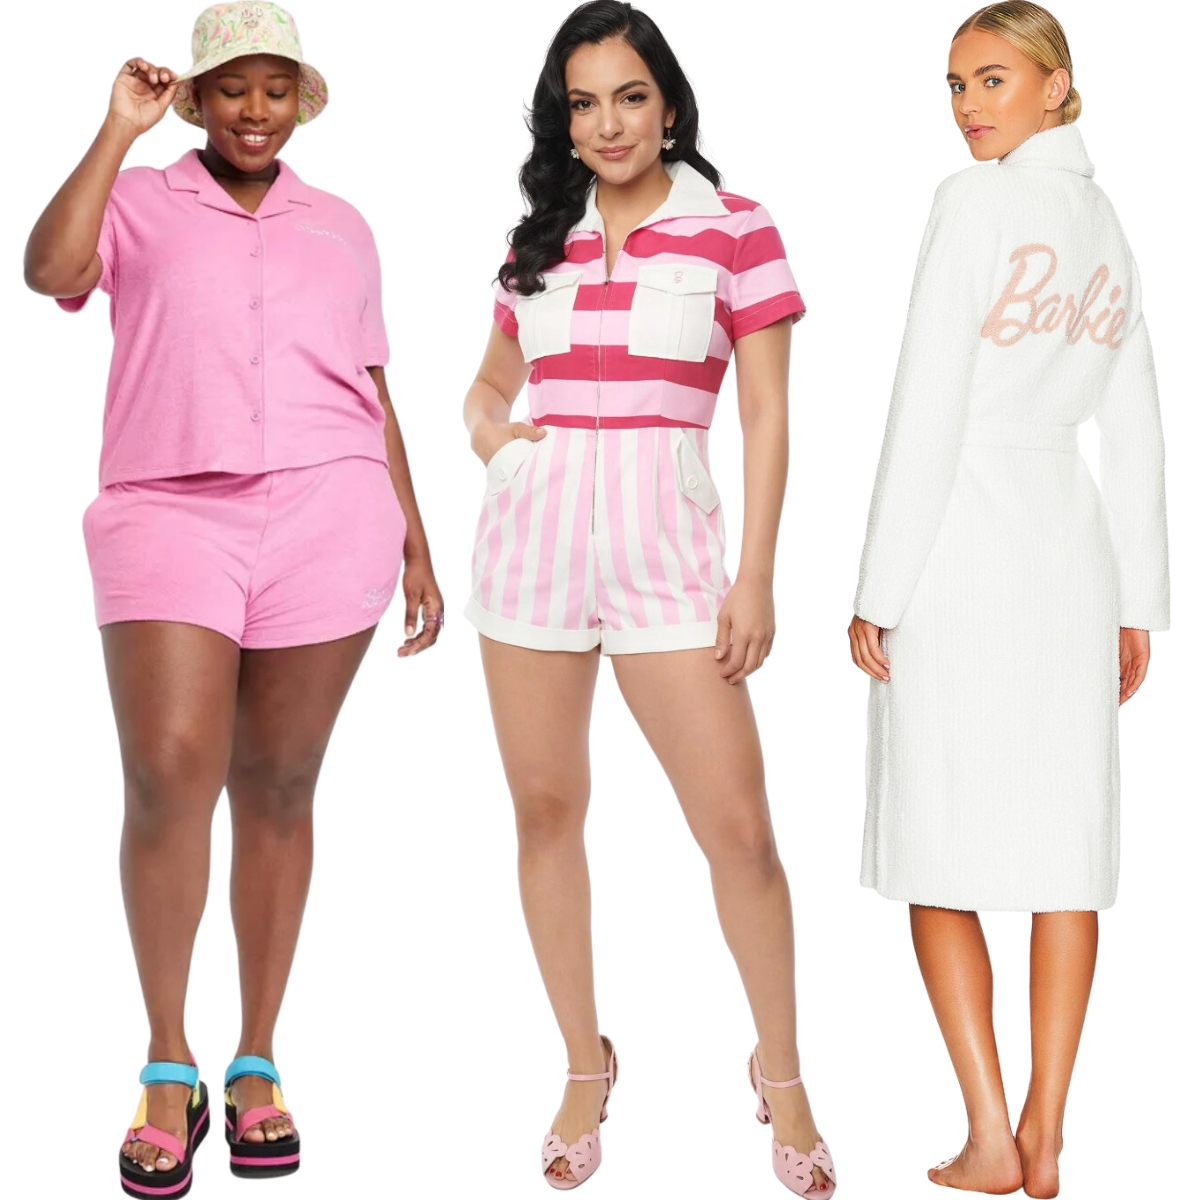 Come on Barbie, Let's Go Shopping: A Guide to the Best Barbie Collabs